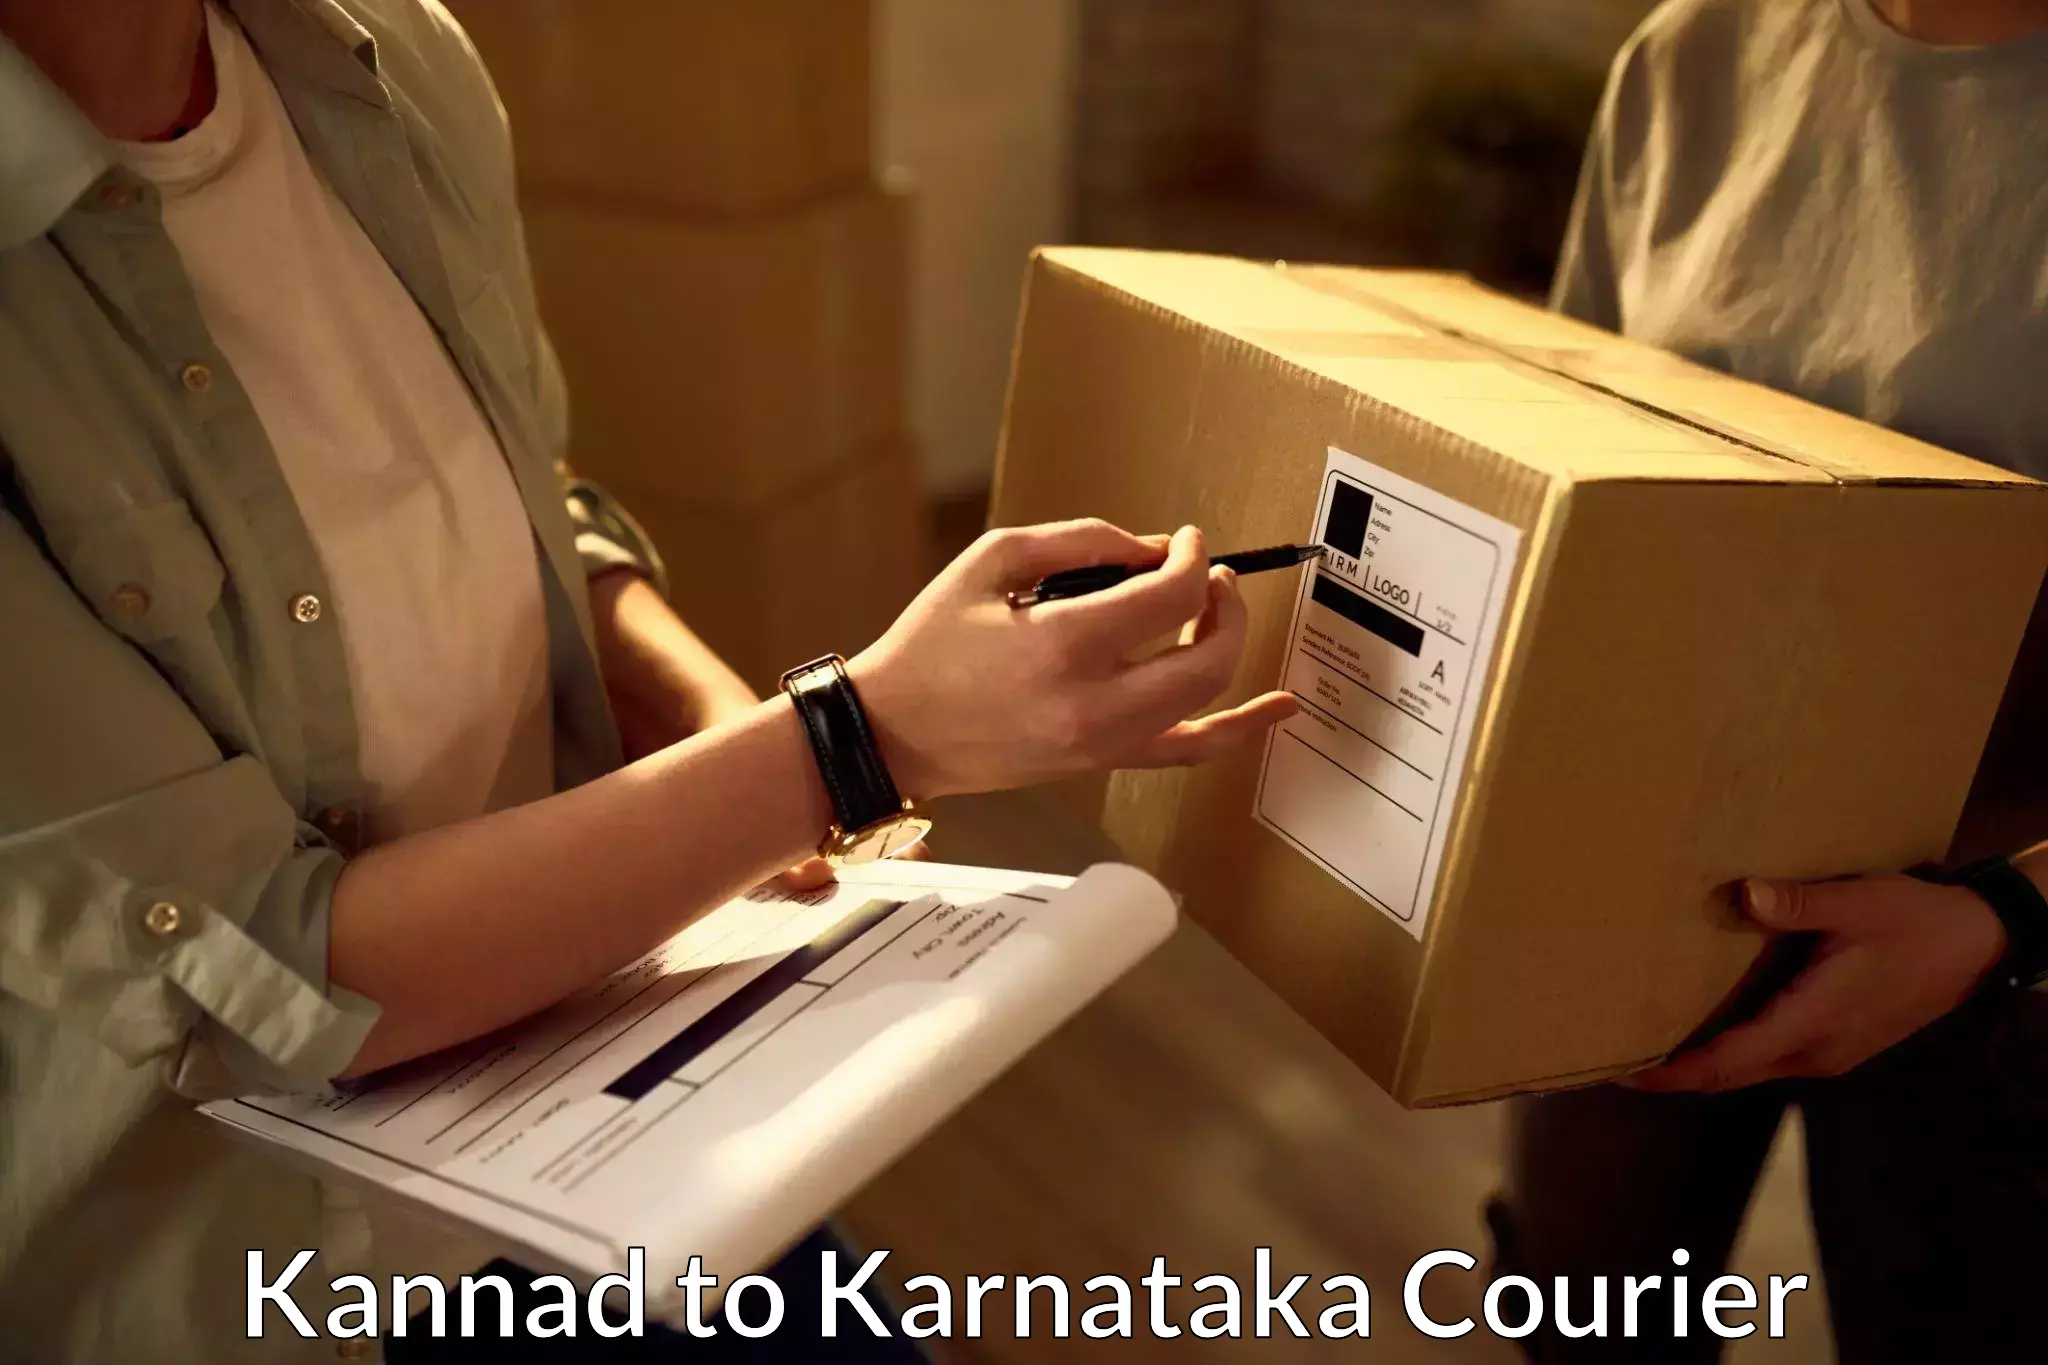 Fast delivery service Kannad to Mangalore Port